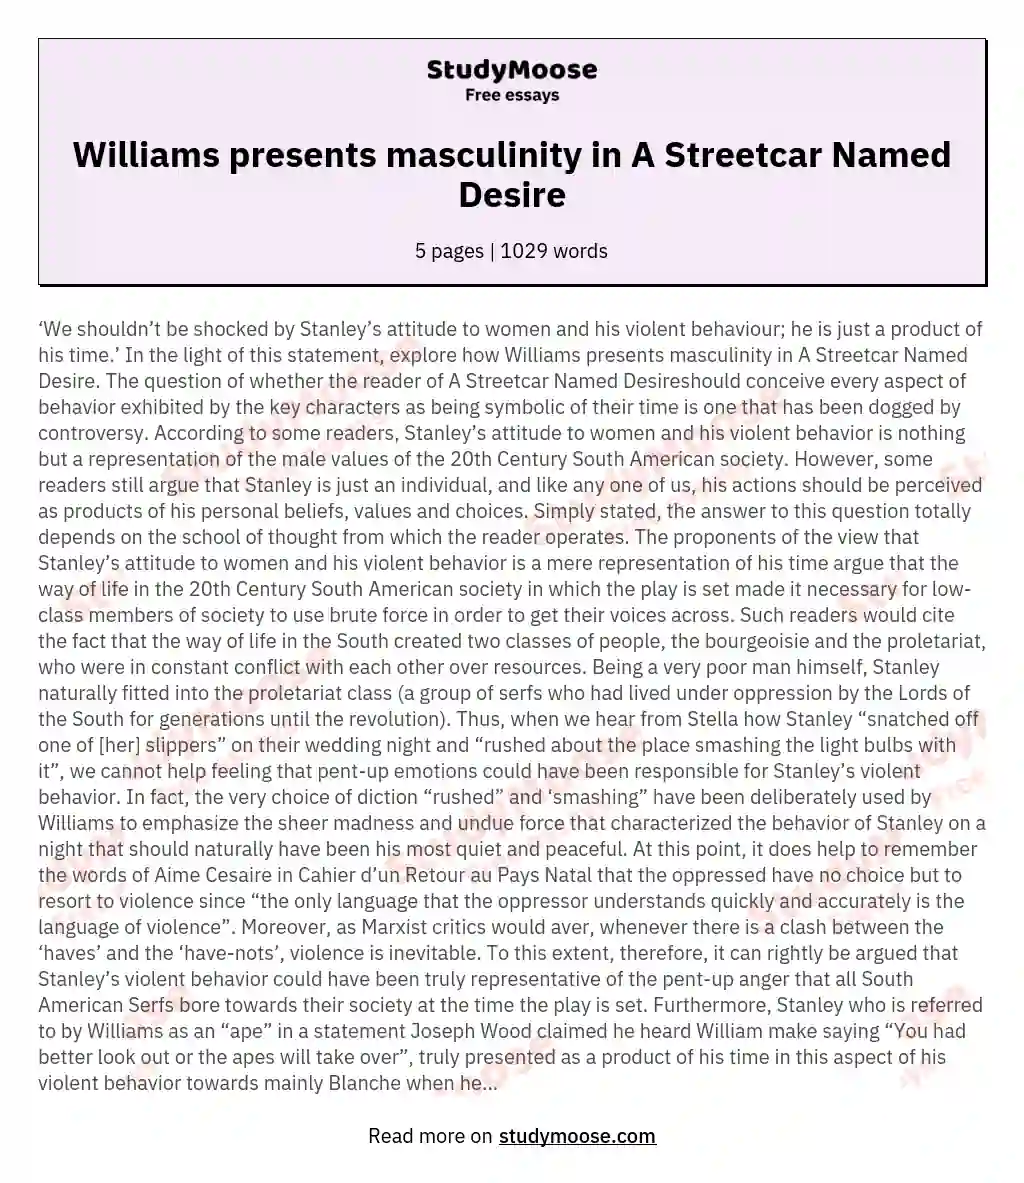 Williams presents masculinity in A Streetcar Named Desire